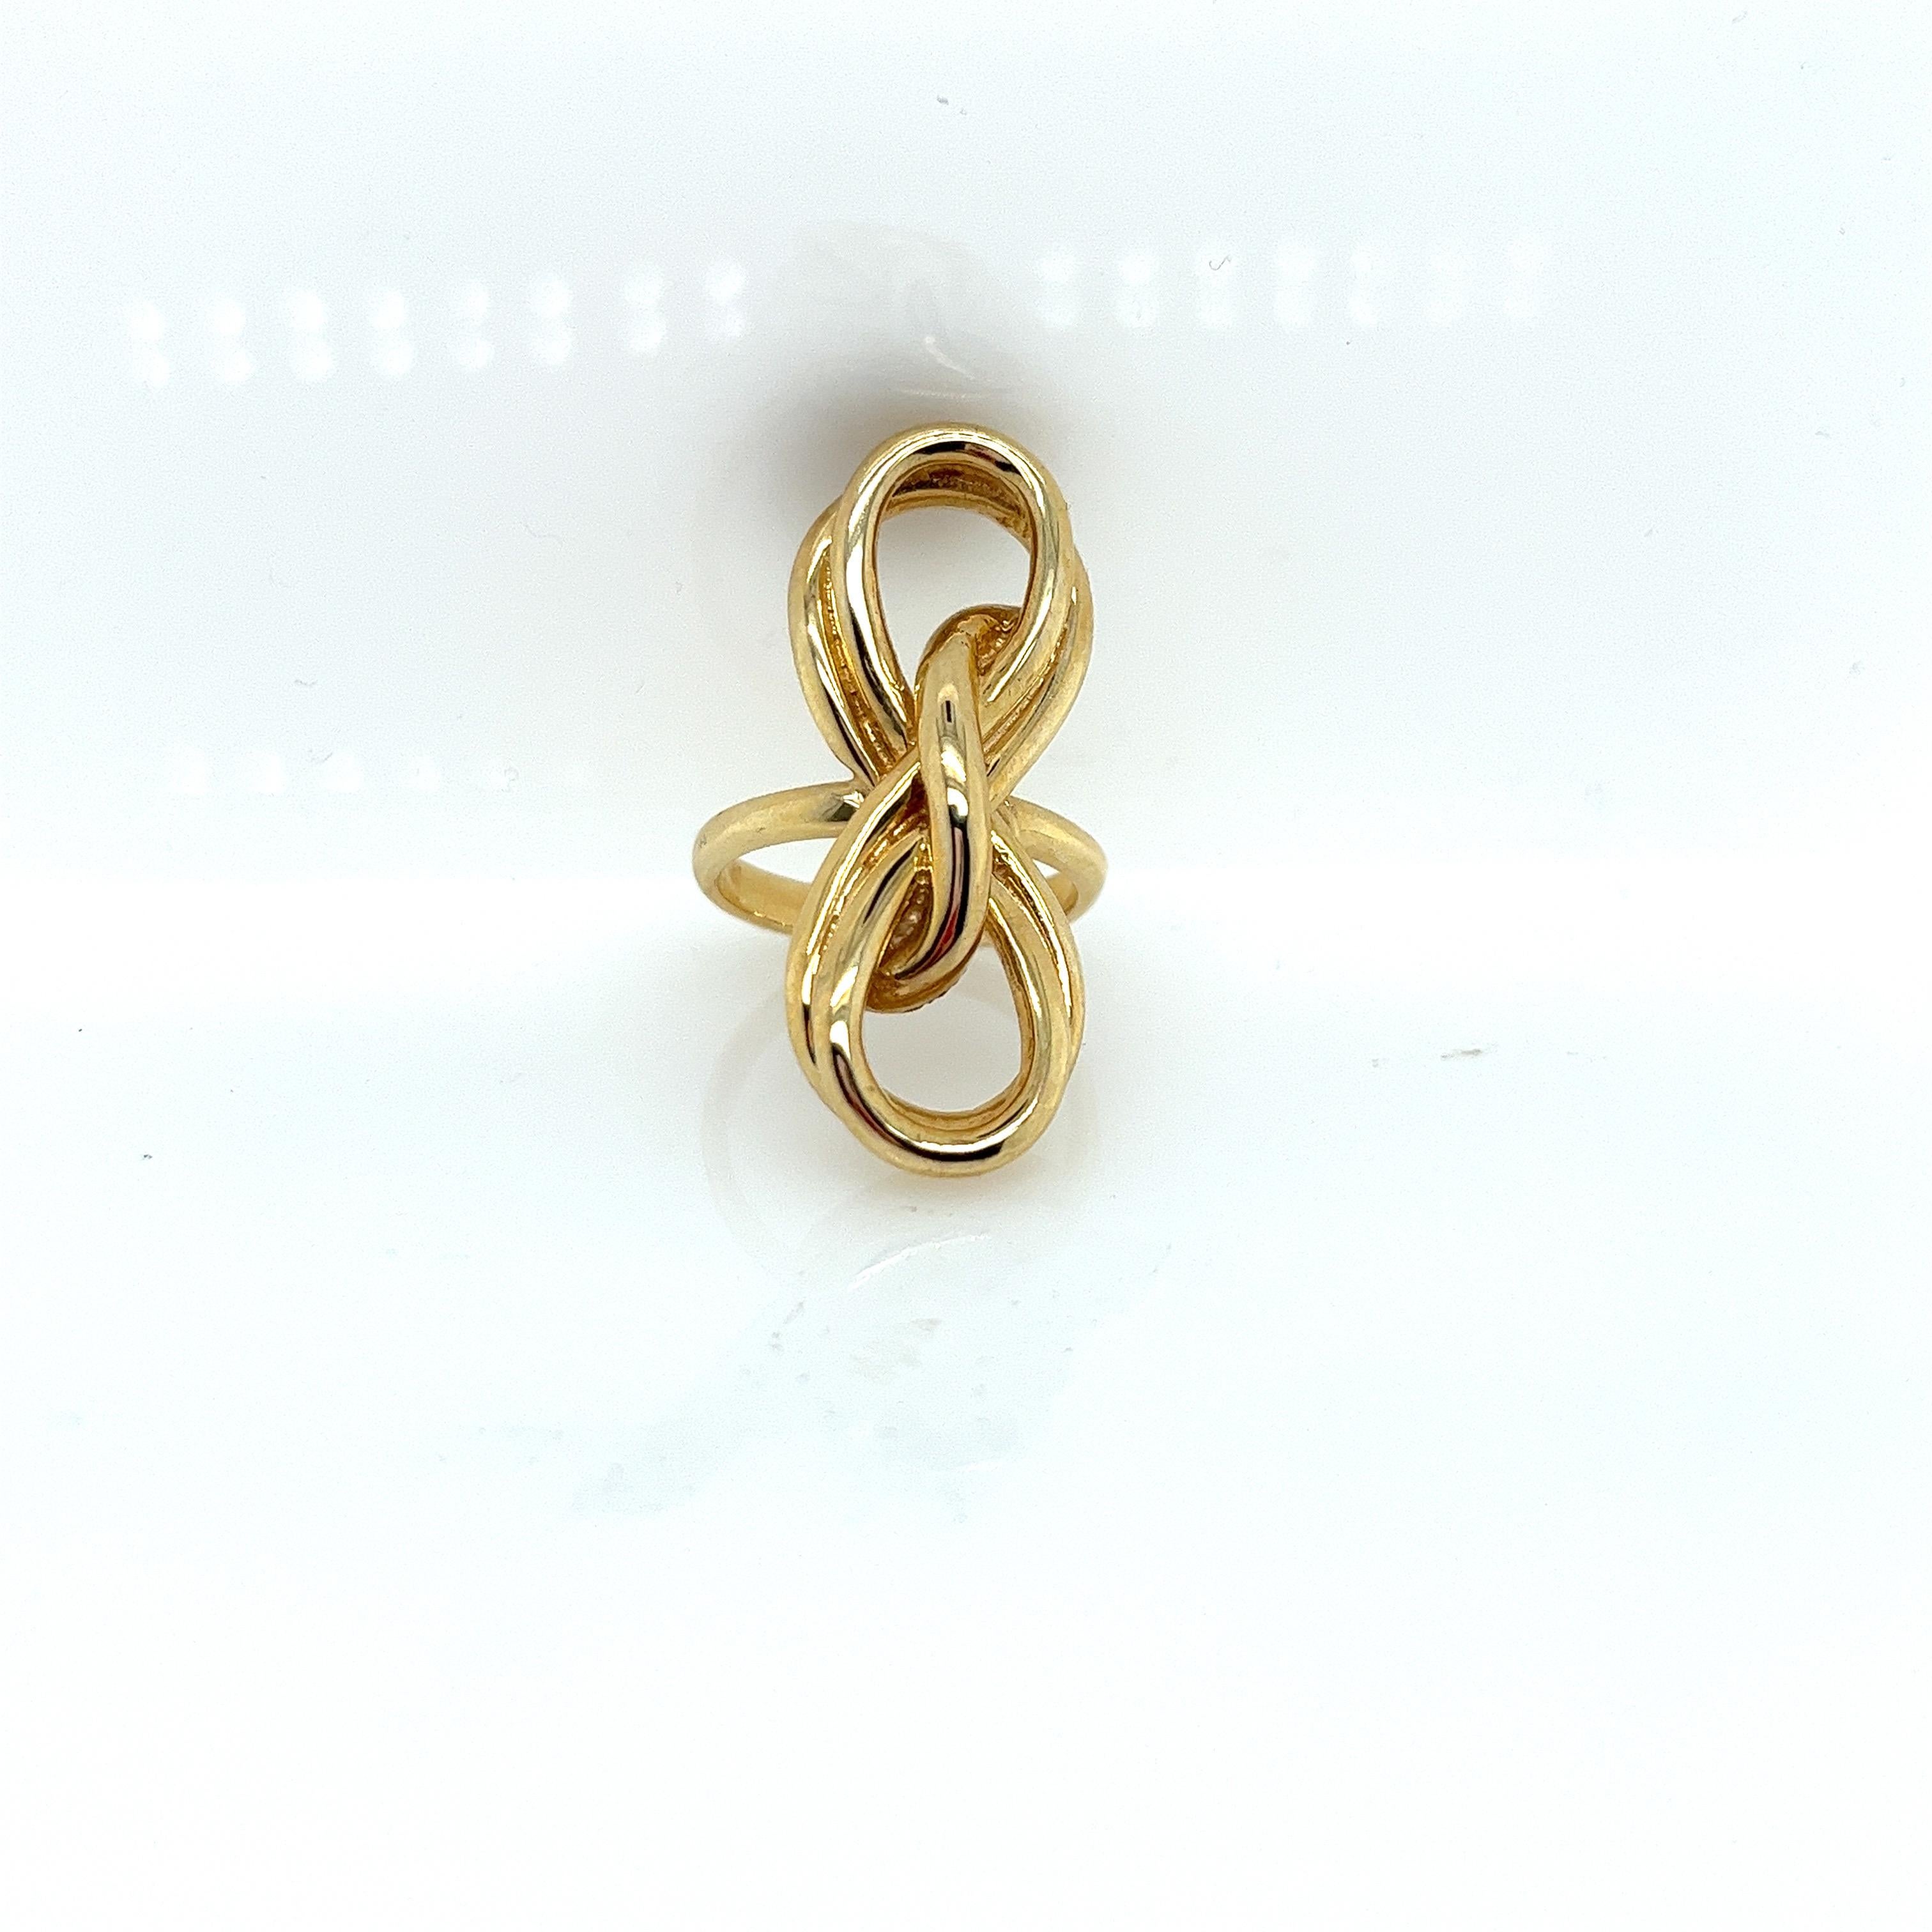 Vintage 1980's 14k Yellow Gold Ribbon Statement Ring. The ribbon measures 34mm long and 14mm wide. The ribbon sits 6mm high off the finger. The width of the band is 2.5mm and gets a little wide on the bottom to 2.9mm. The finger size is 6.75 and it